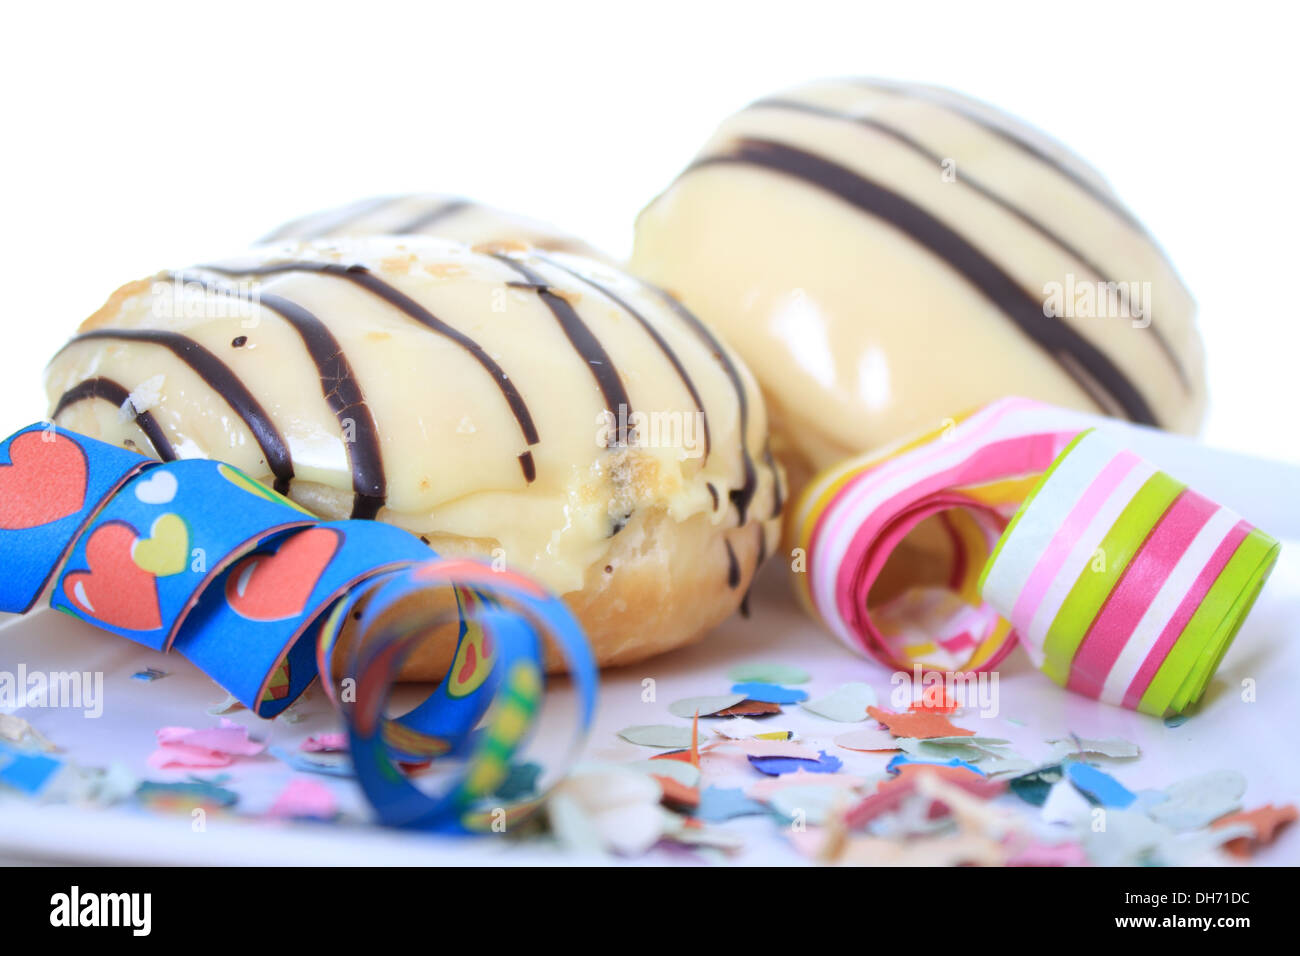 Delicious doughnut, donuts with sugar and chocolate Stock Photo